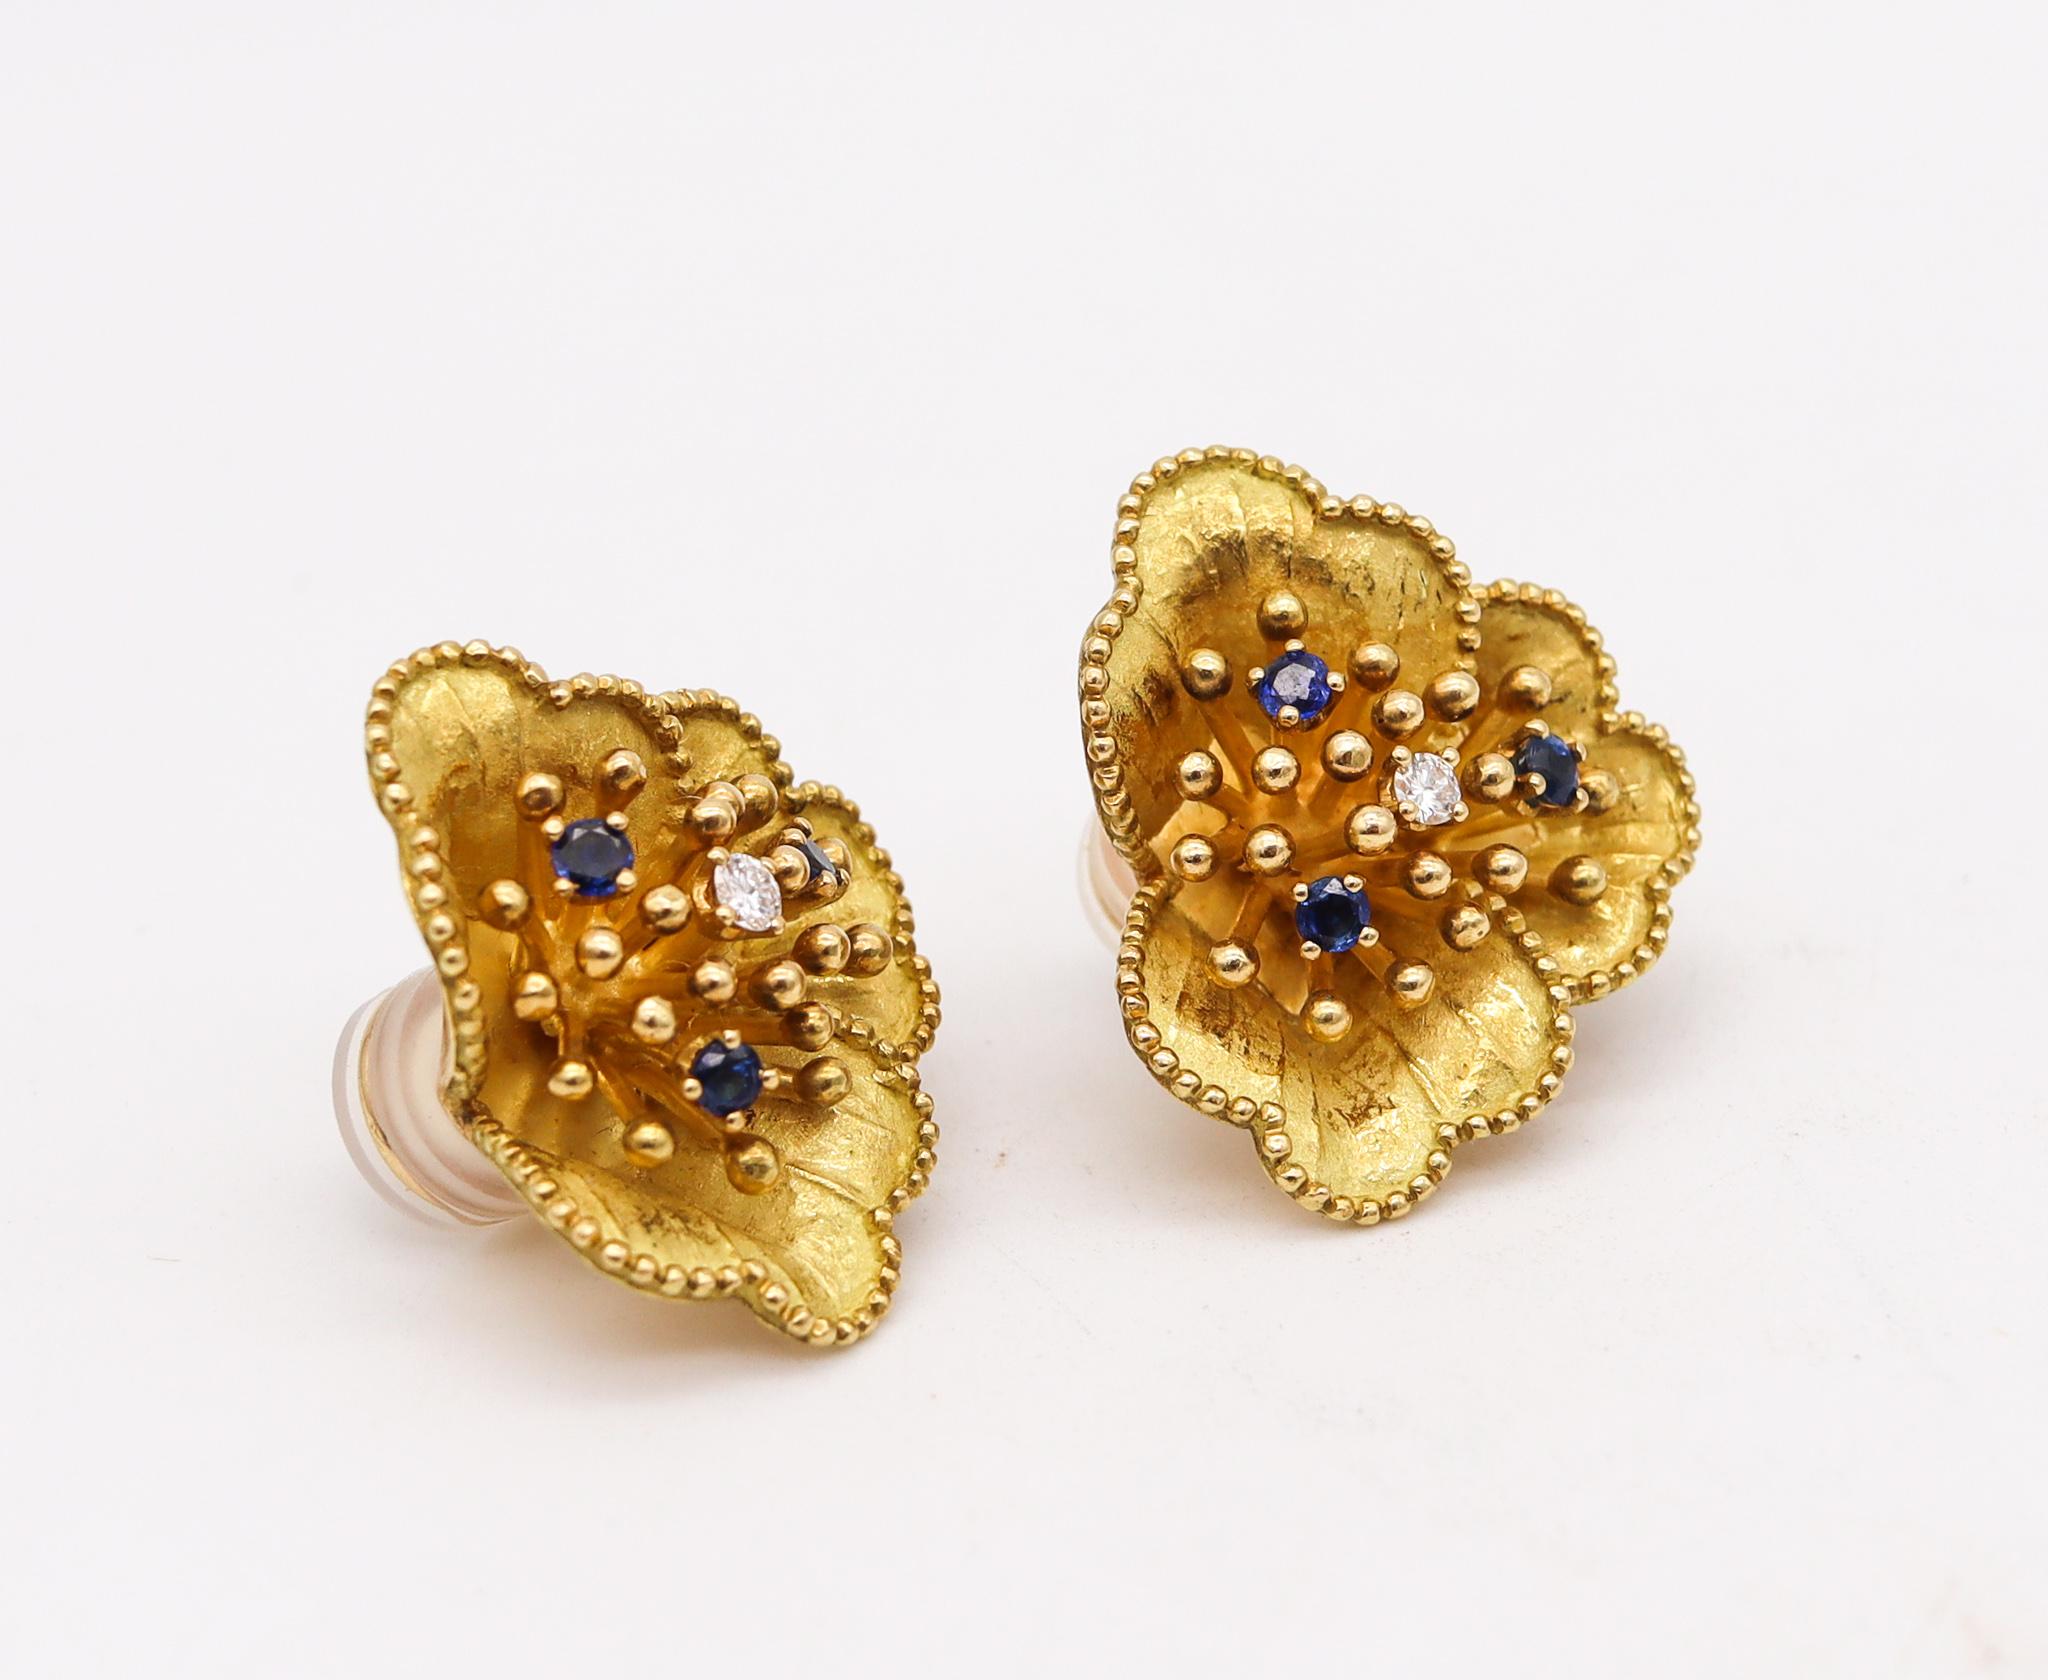 Pair of earrings designed by Tiffany & Co.

Very nice pair of clips earrings, created by Tiffany & Co. back in the 1960's. They was crafted with organic, floreated and dotted patterns in solid yellow gold of 18 karats with textured finish. Fitted